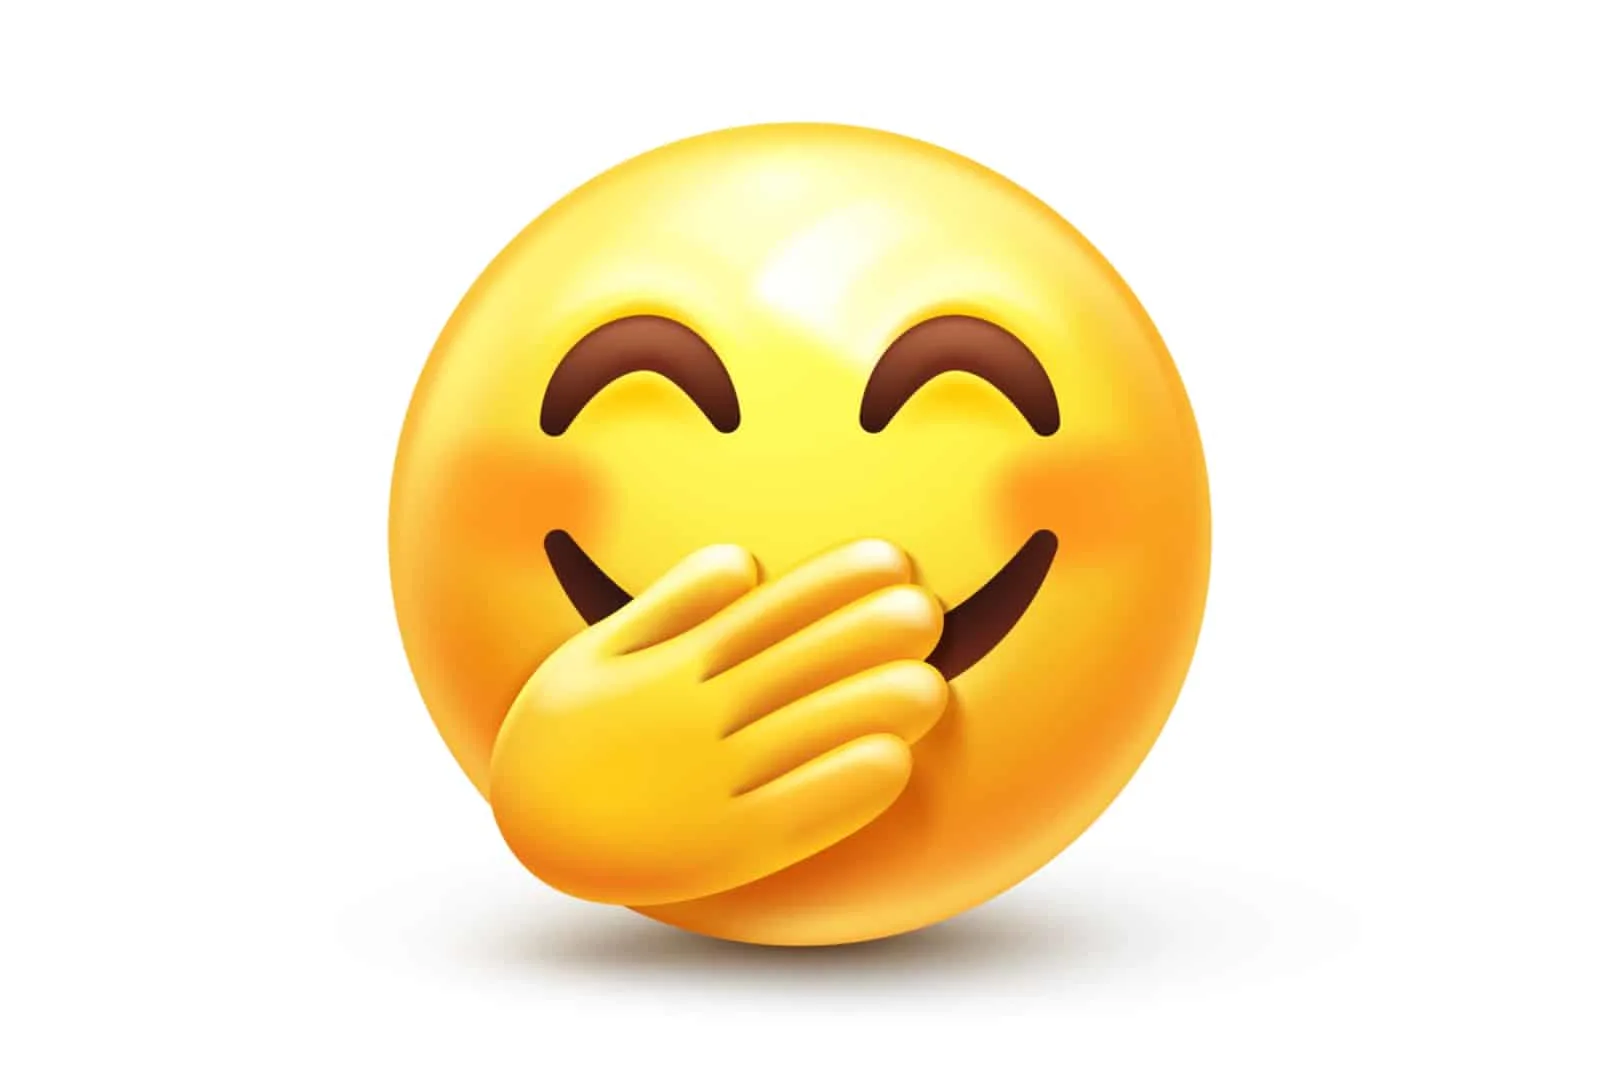 the face with hand over mouth emoji meaning from a guy